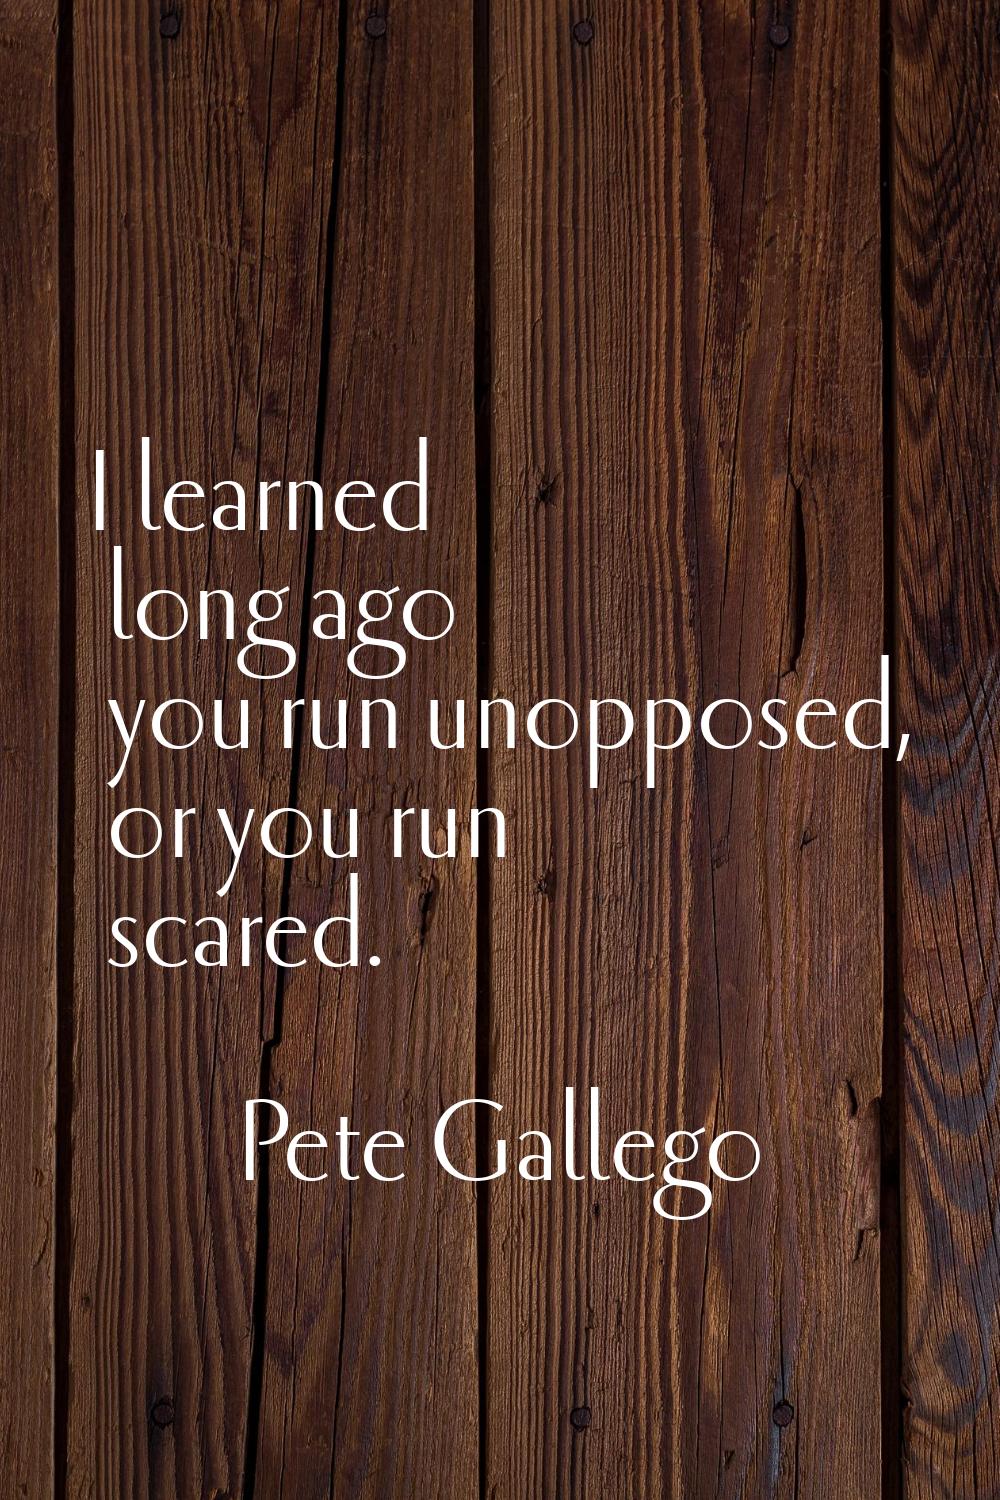 I learned long ago you run unopposed, or you run scared.